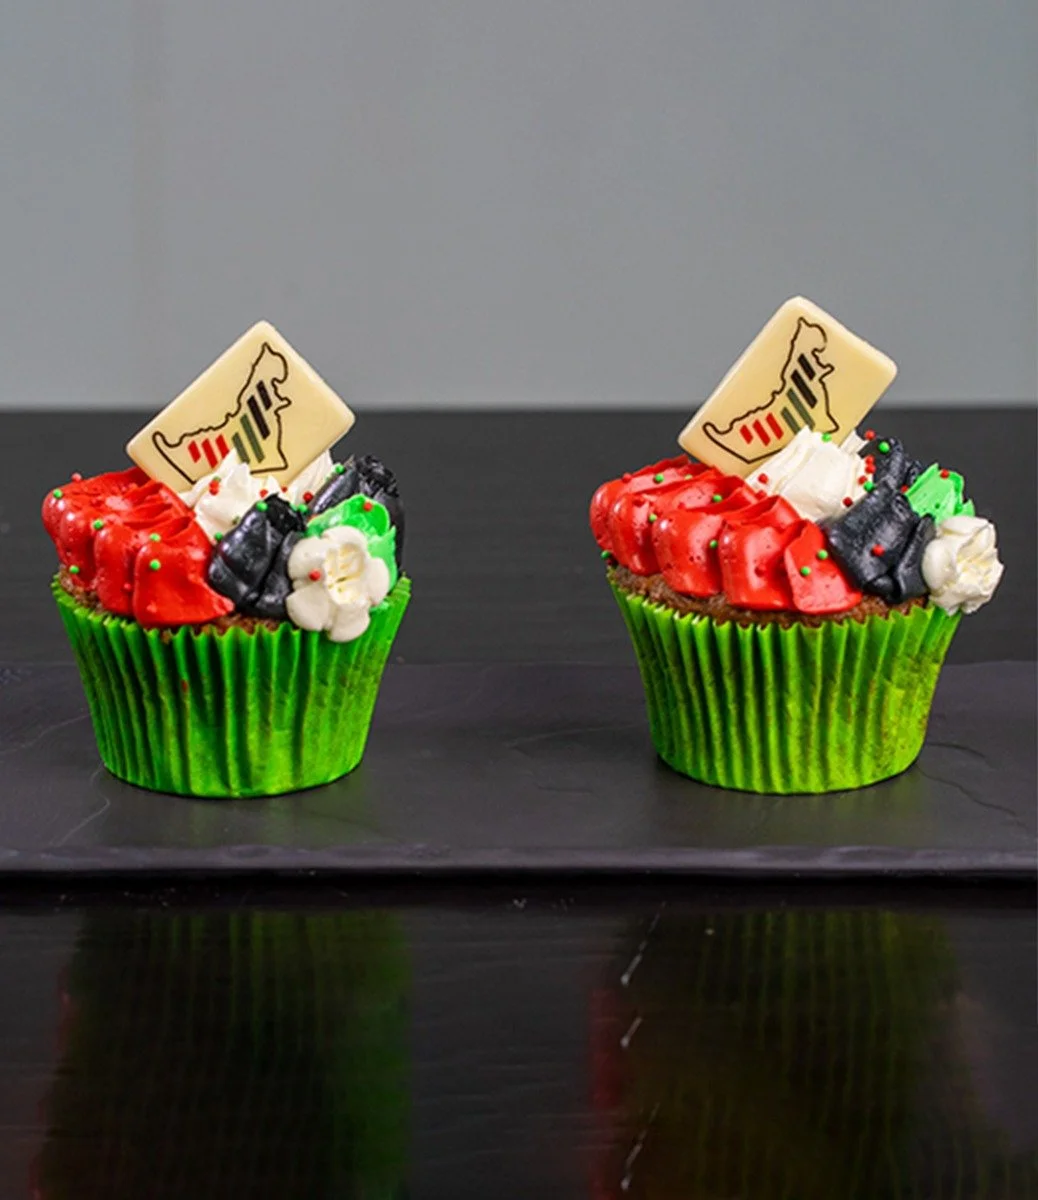 National Day Flower Cupcakes by Bloomsbury's